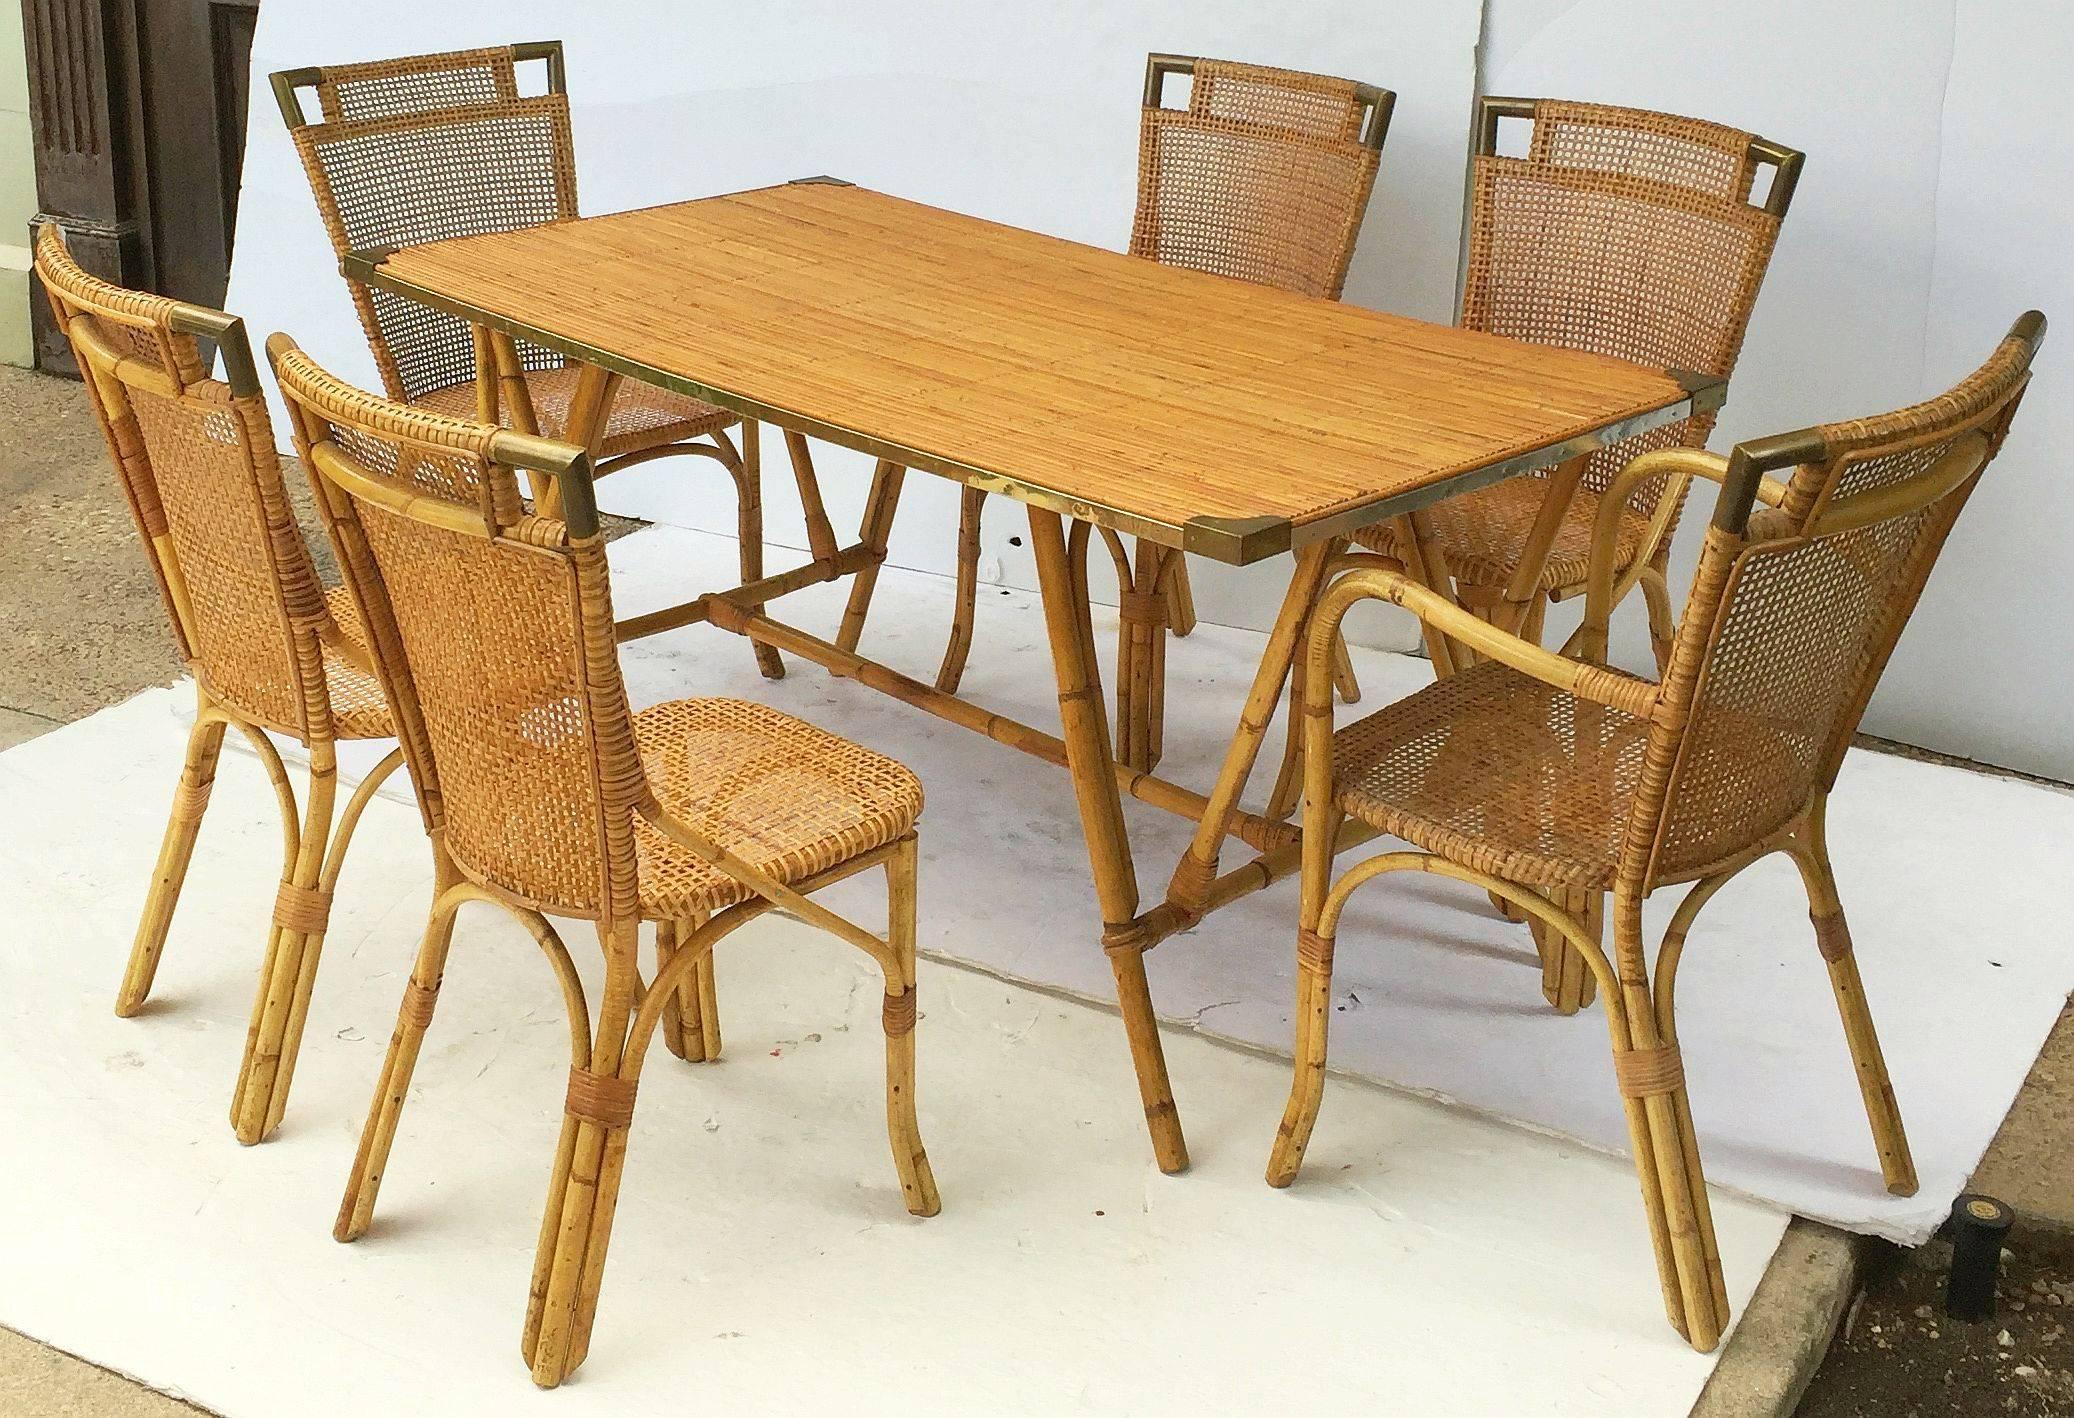 A fine French rattan and bamboo table and rattan chairs set from the mid-20th century, featuring a large rectangular table with brass-bound rattan top set upon a stylish bamboo stretcher base, two armchairs with brass-bound corners on the backs and